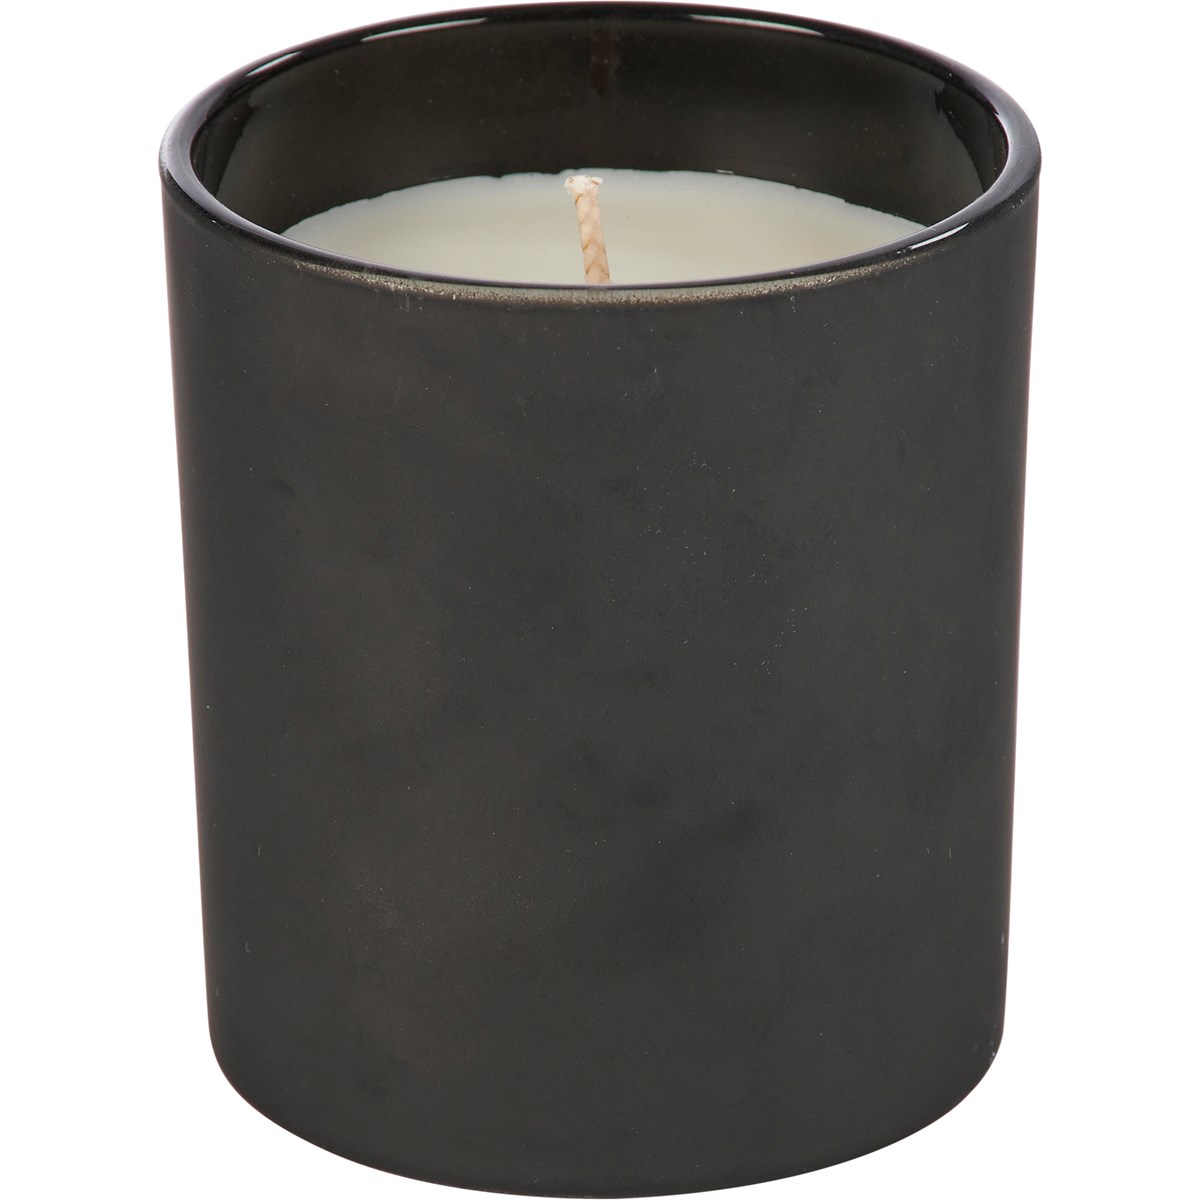 Home Is Where The Herd Is Jar Candle - Soy Wax, Glass, Cotton